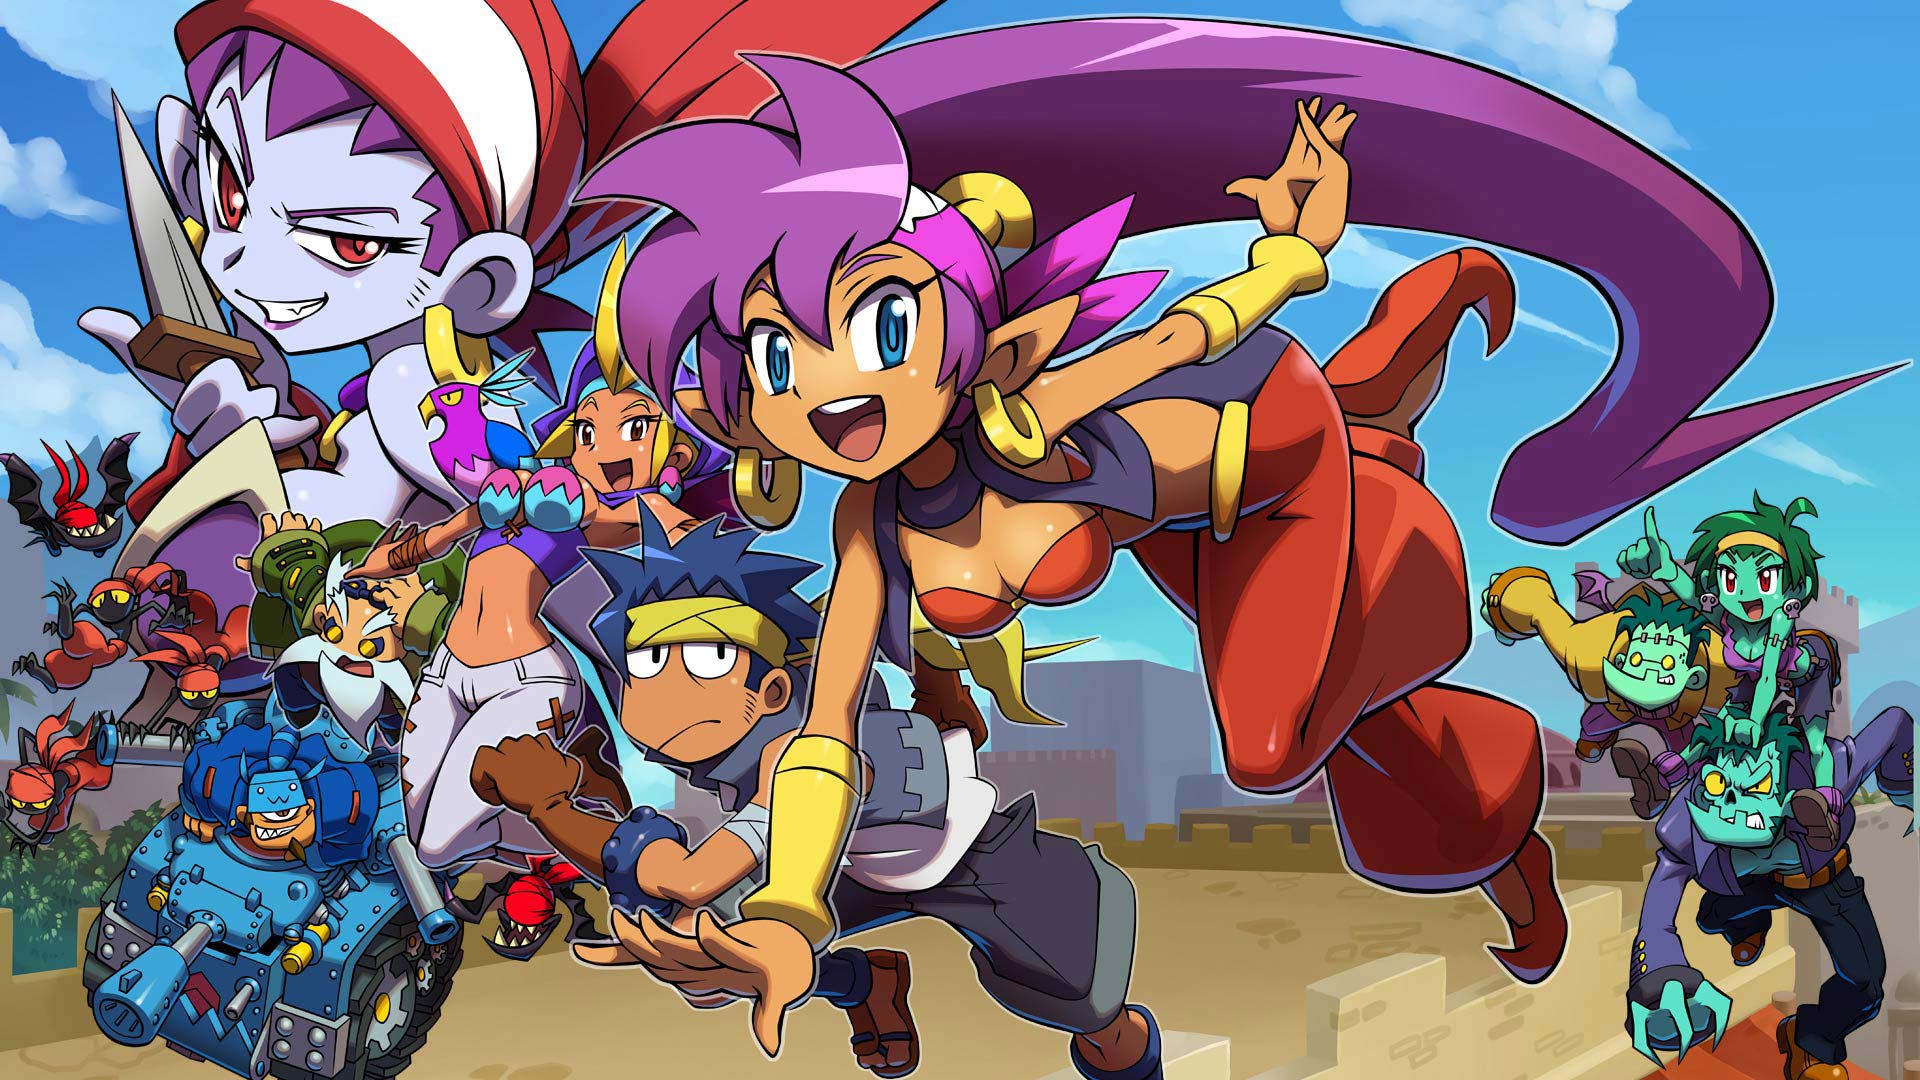 Shantae and friends. Wallpaper from Shantae and the Pirate's Curse